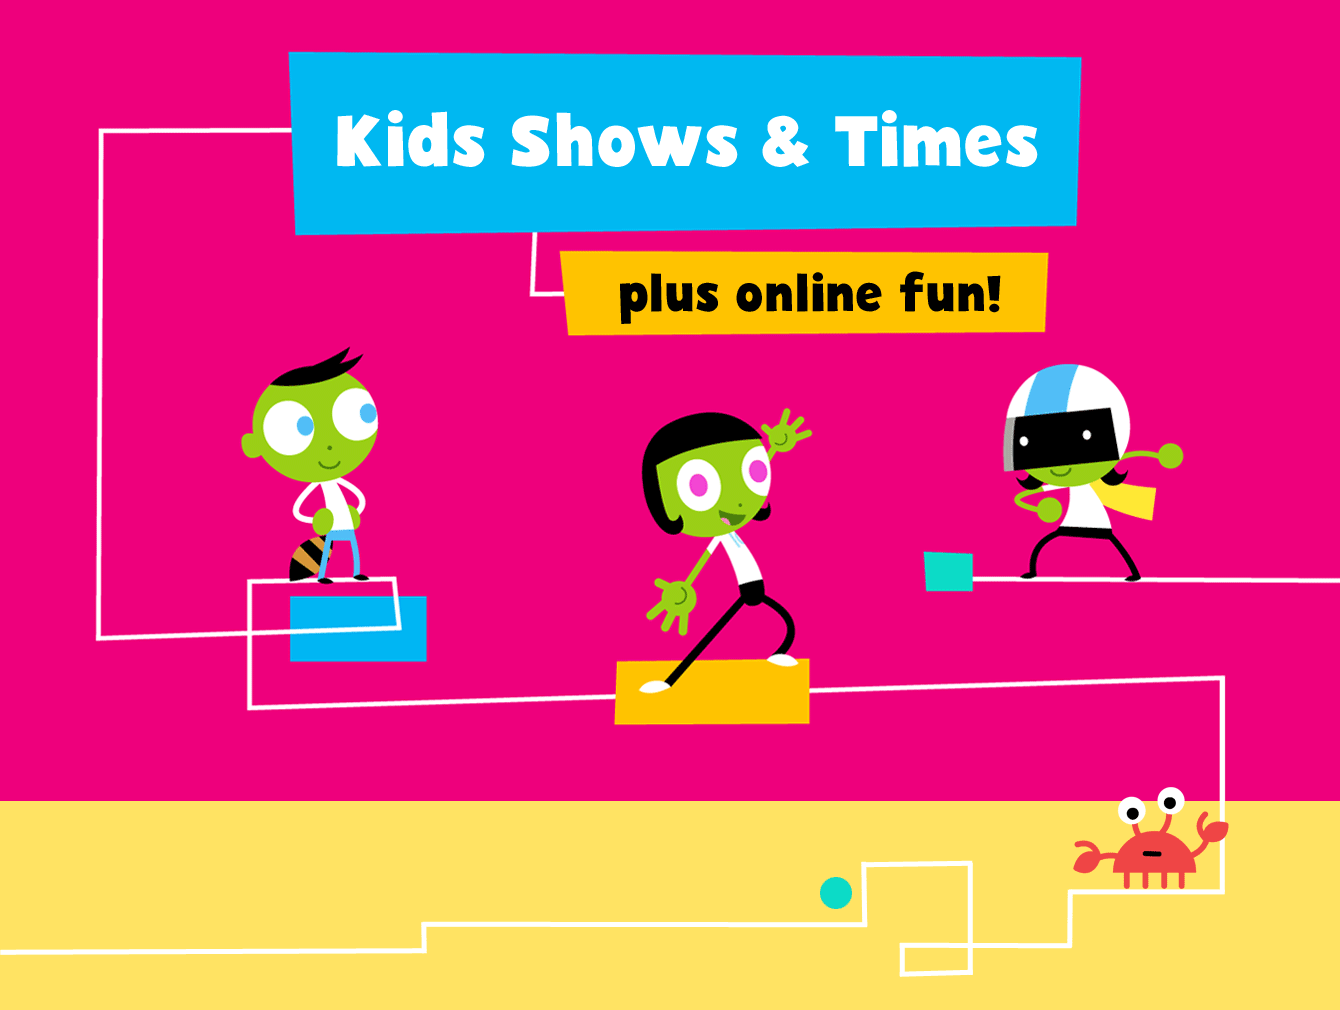 Kids Shows & Times